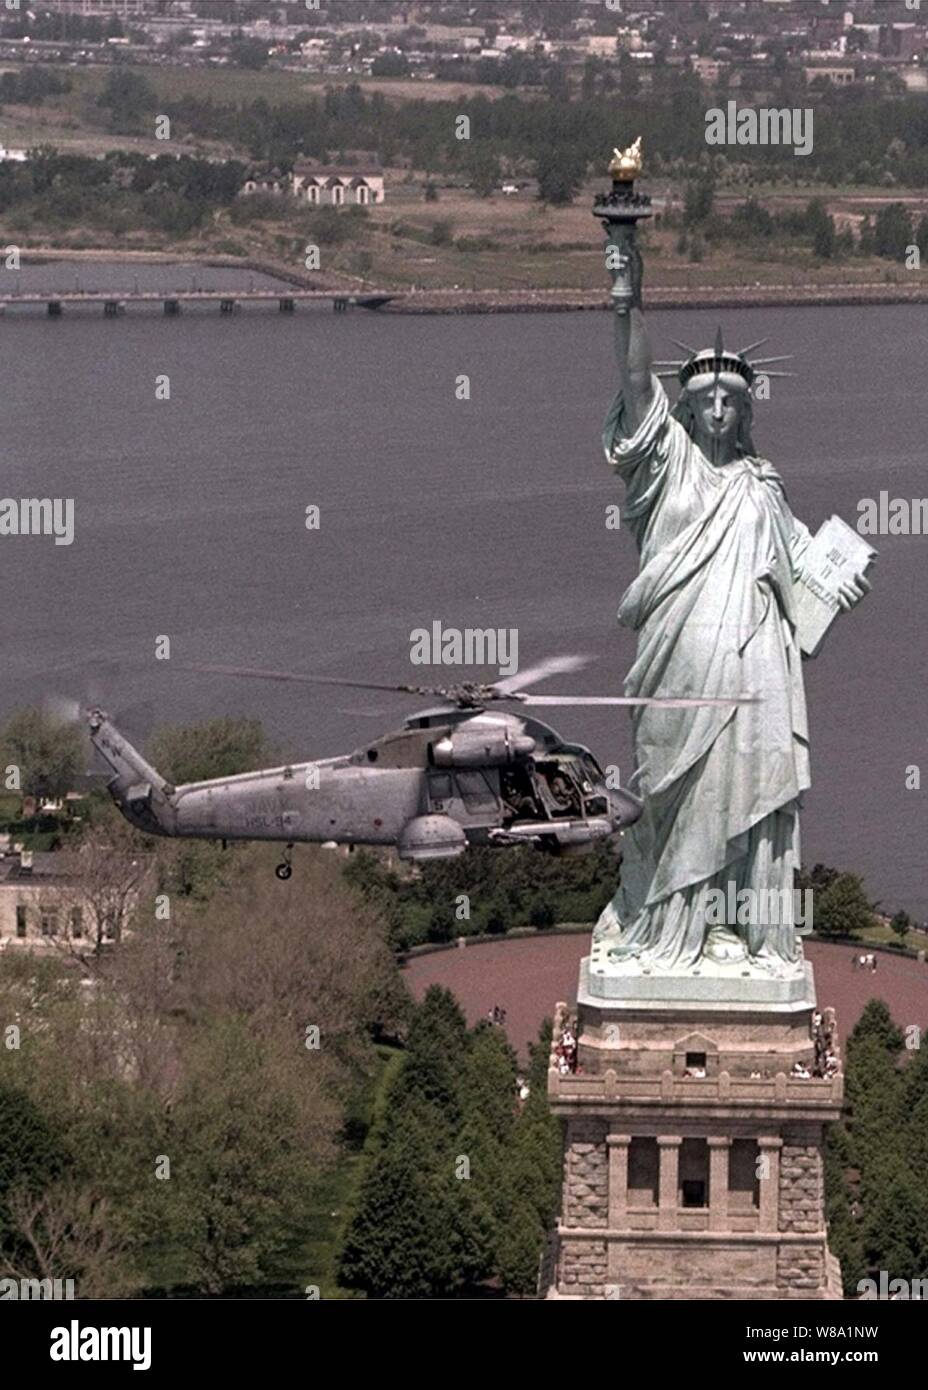 A U.S. Navy SH-2 Seasprite helicopter flies by the Statue of Liberty during the opening ceremonies of Fleet Week '98 in New York on May 20, 1998.  The Seasprite is a ship based helicopter with anti-submarine and anti-ship surveillance and targeting capabilities.  The Seasprite is from Light Helicopter Anti-Submarine Squadron 94, Naval Air Station Willow Grove, Pa. Stock Photo